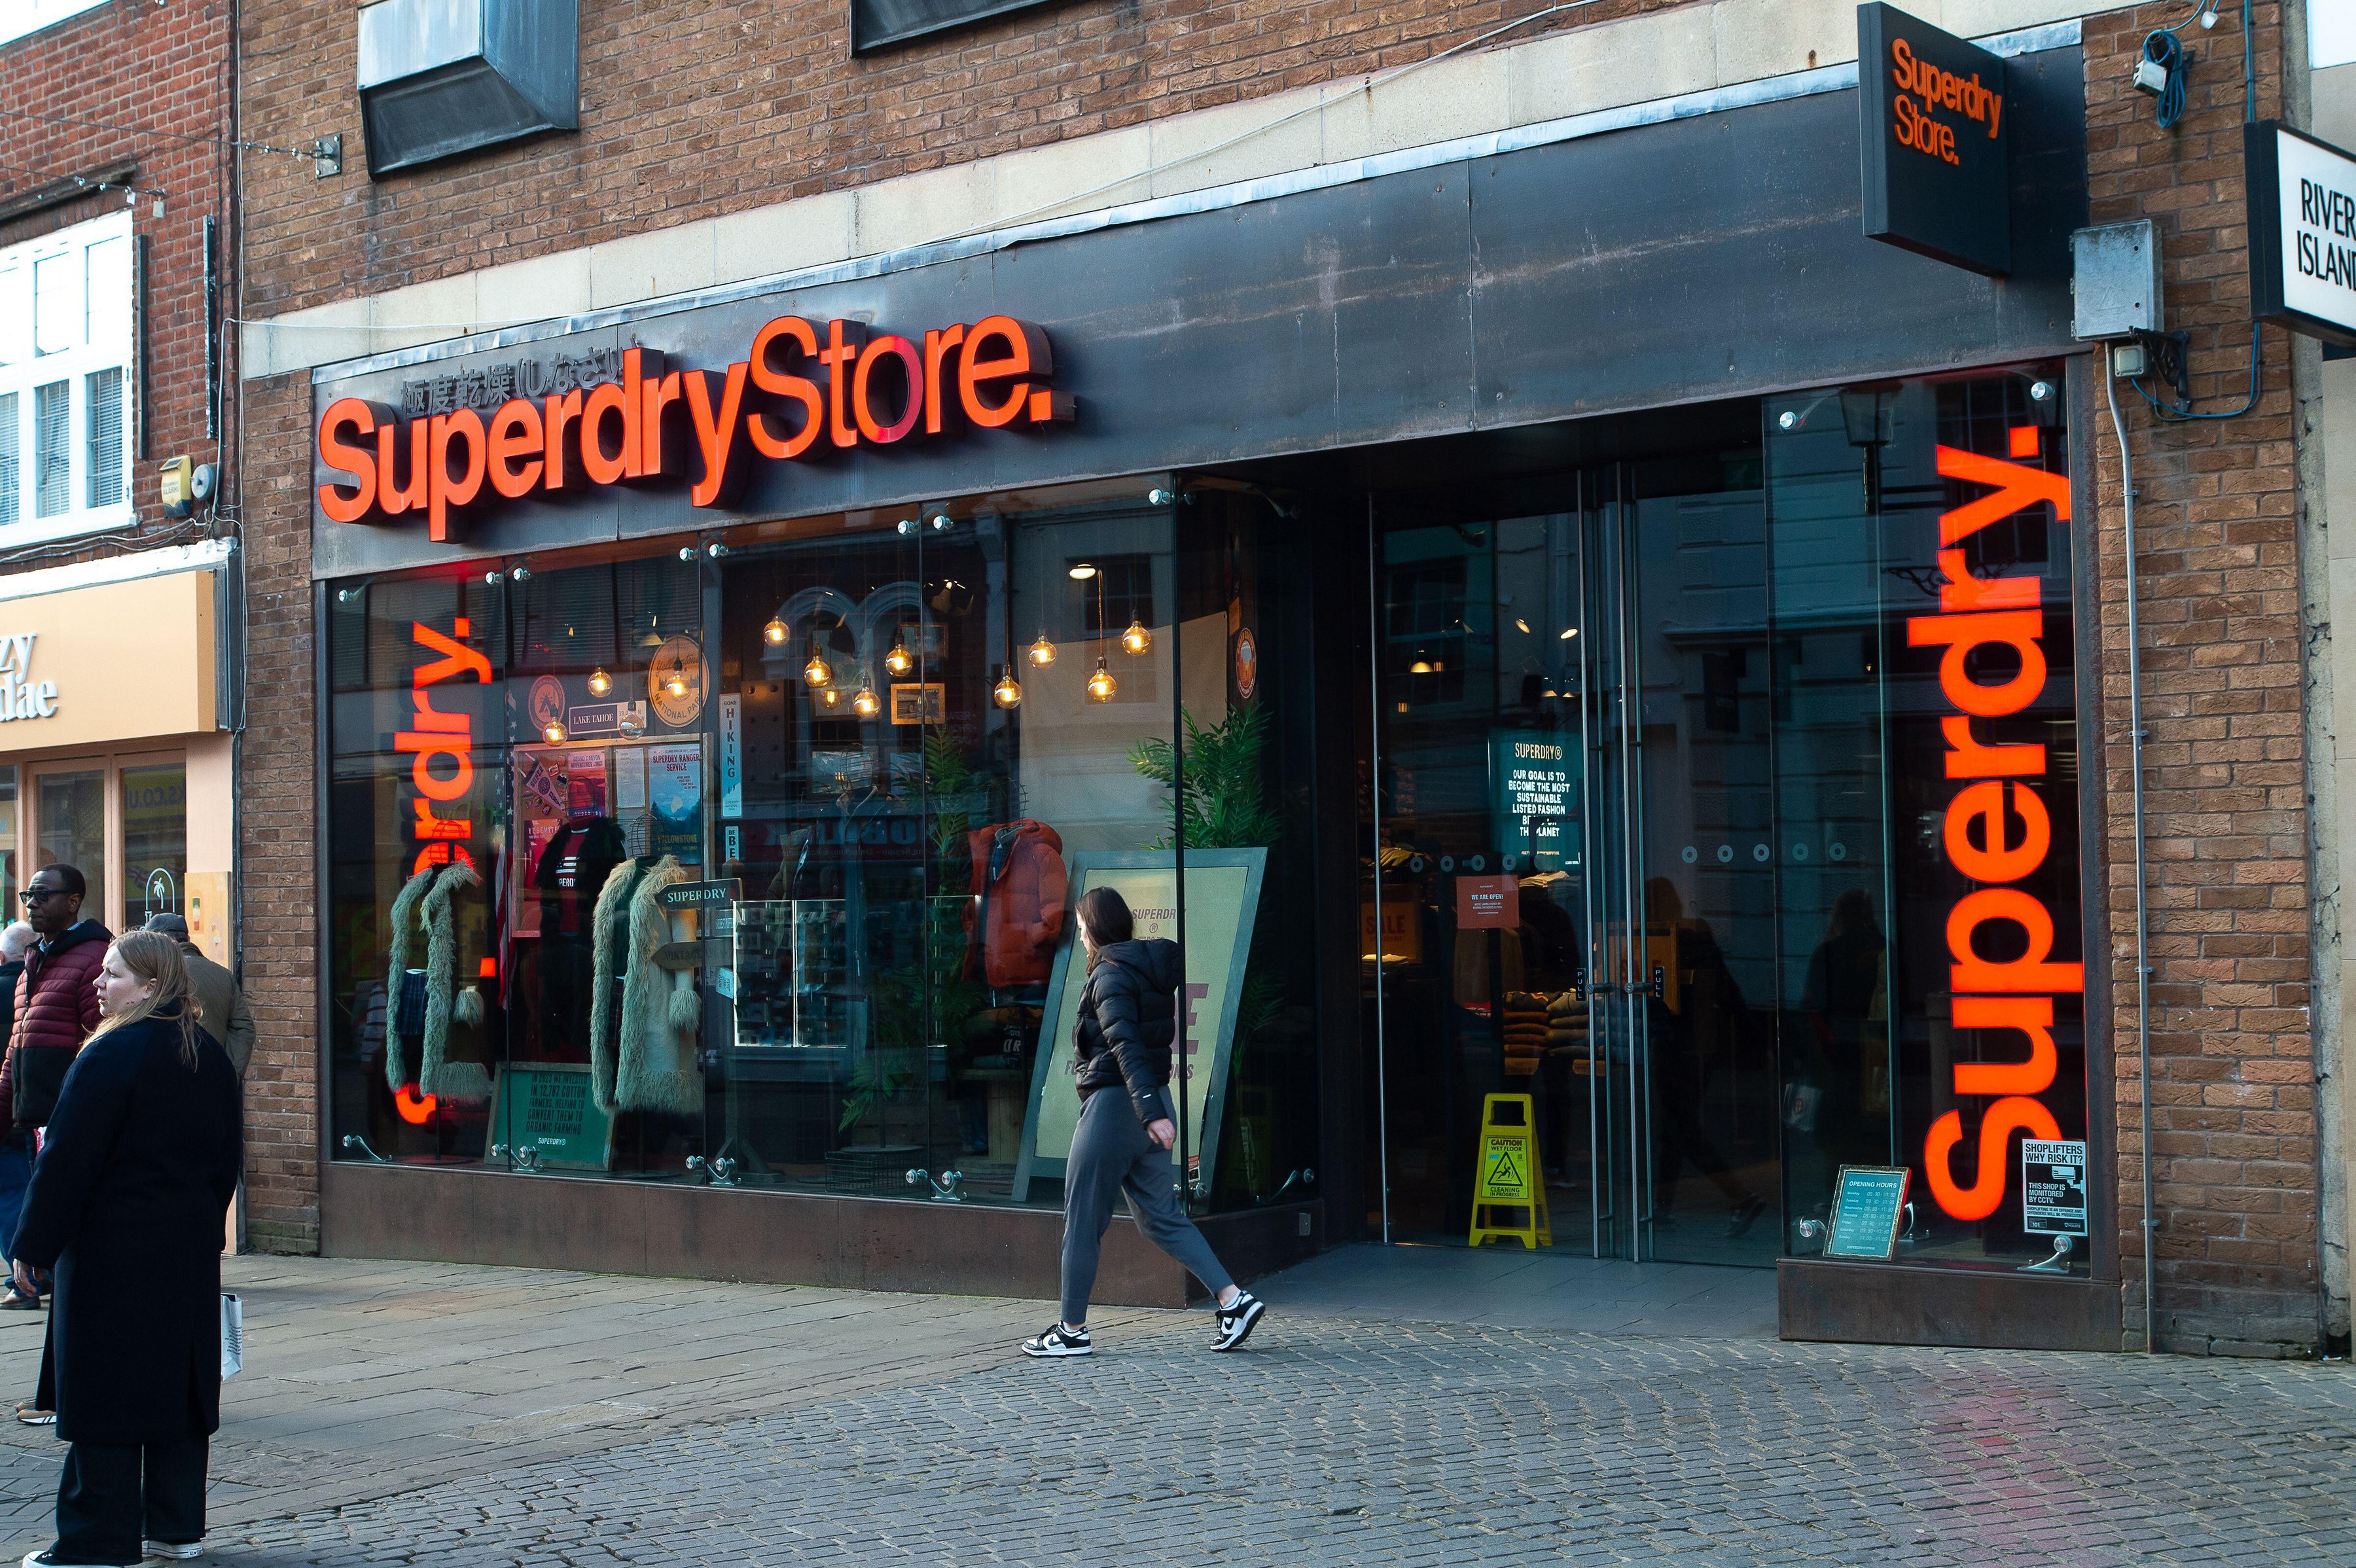 Superdry co-founder and chief executive, Julian Dukerton who owns a 20% stake in the high street clothing store, is reportedly seeking potential partners to buy the company